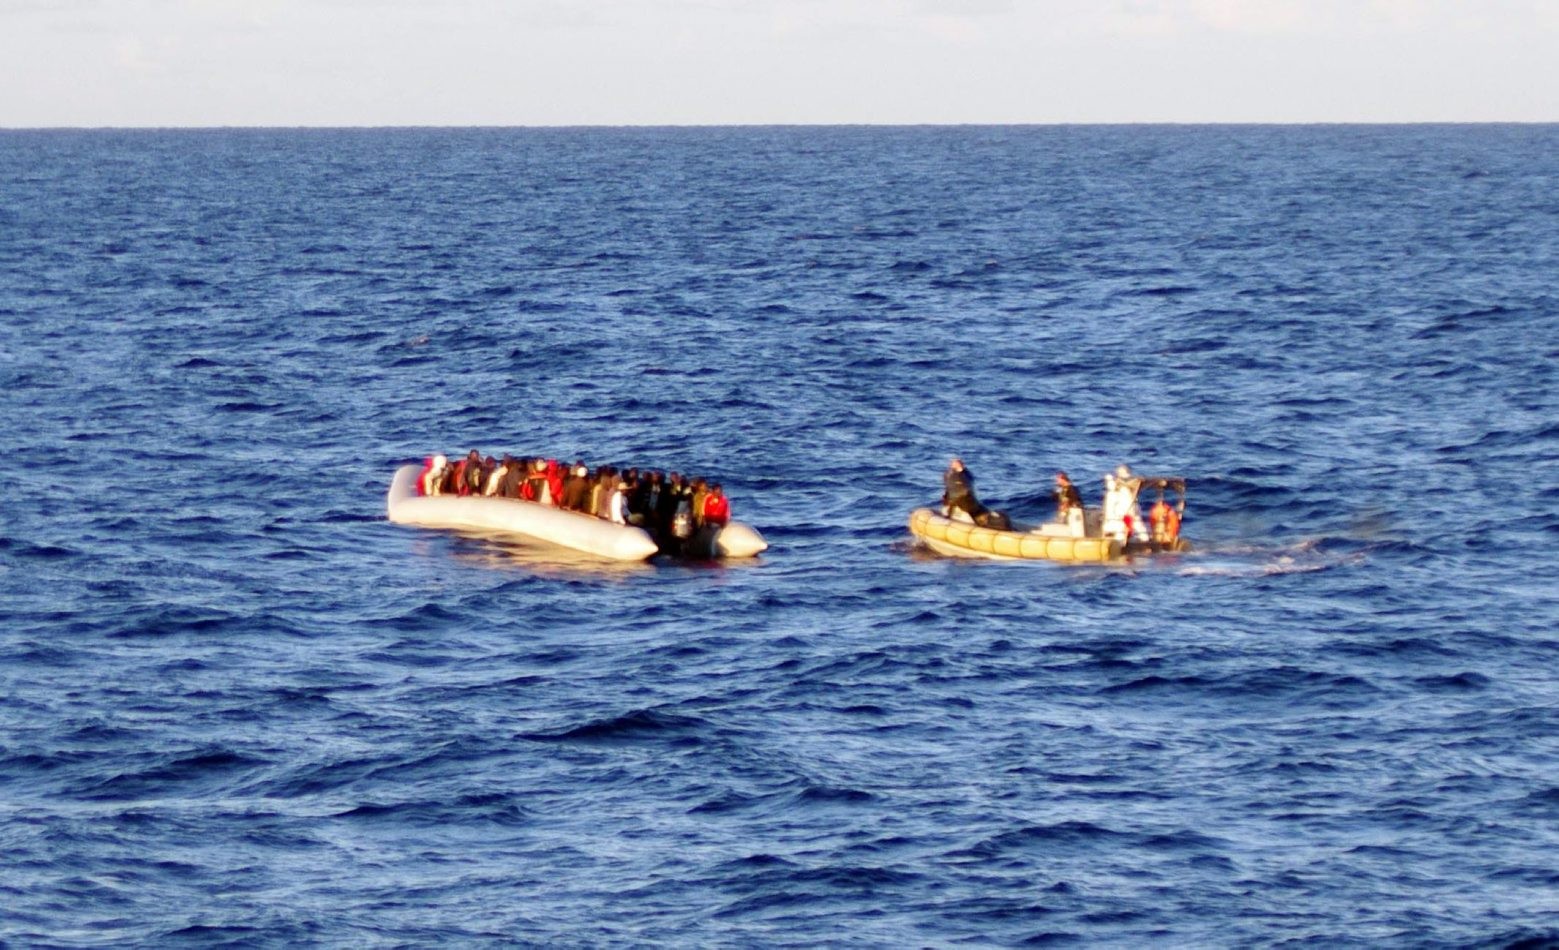 In this photo taken on Thursday, Dec. 4, 2014 provided by the Italian Navy, a rescue crew on a dinghy, right, approaches migrants on a boat some 40 miles (65 kilometers) from the Libyan capital, Tripoli. Rescue crews discovered 16 bodies in a migrant boat off Libya, the first reported deaths since the European Union took over Mediterranean rescue operations, the Italian navy said Friday. The EU operation, launched last month after Italy phased out its more robust rescue program, foresees patrols 30 miles (50 kilometers) from the Italian coast. (AP Photo/Italian Navy) Italy Migrants Deaths